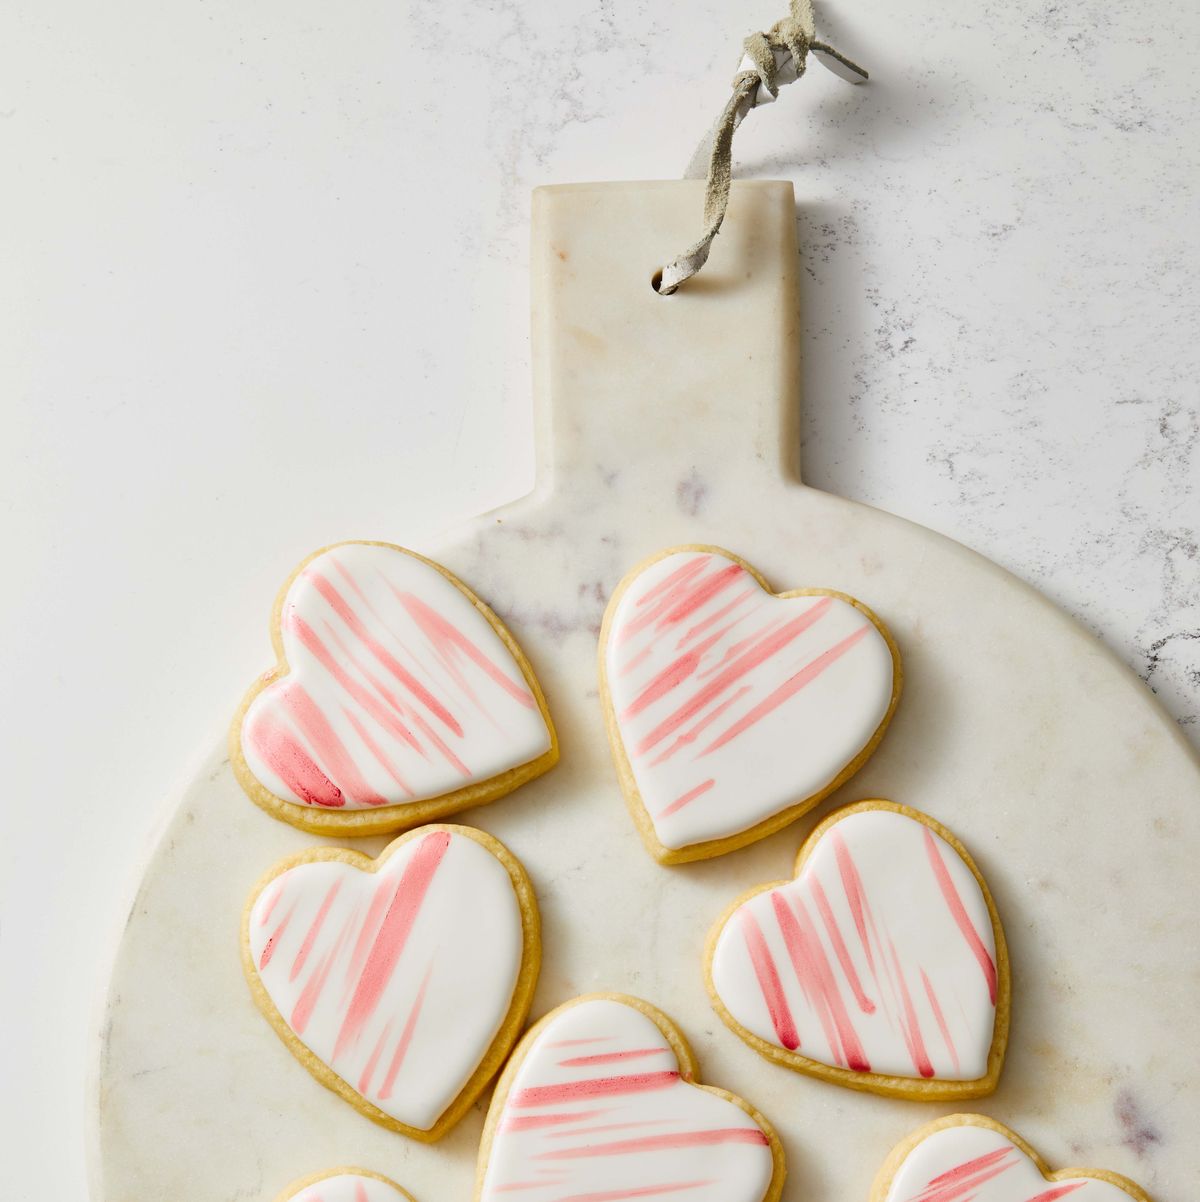 https://hips.hearstapps.com/hmg-prod/images/heart-shaped-cookies-1639064128.jpg?crop=1.00xw:0.668xh;0,0.281xh&resize=1200:*